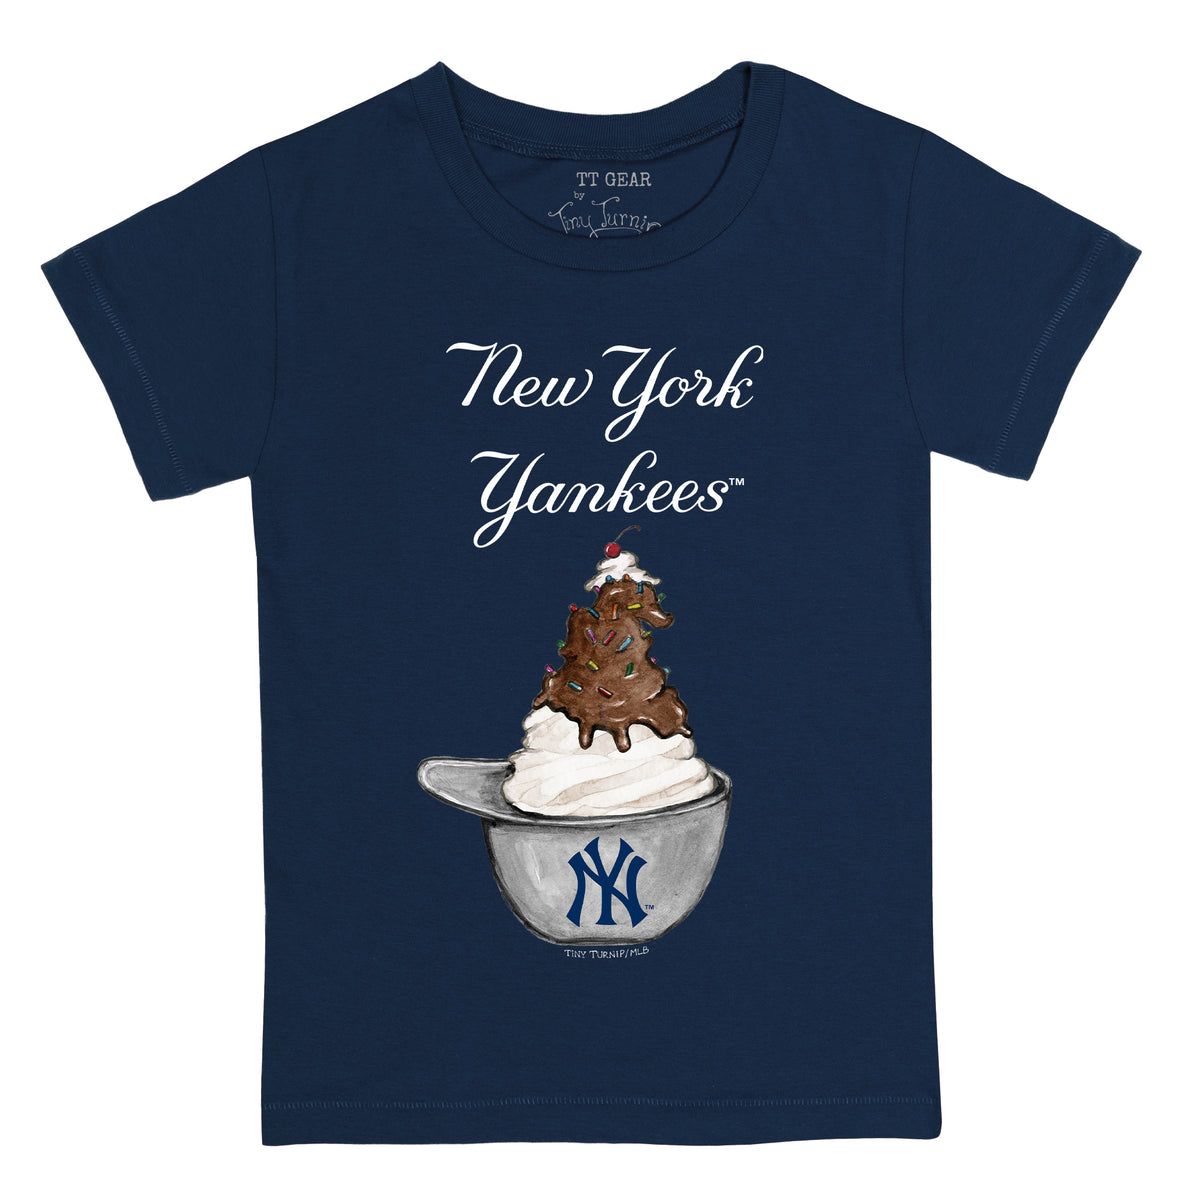 New york yankees jersey - no name/number (youth XL)